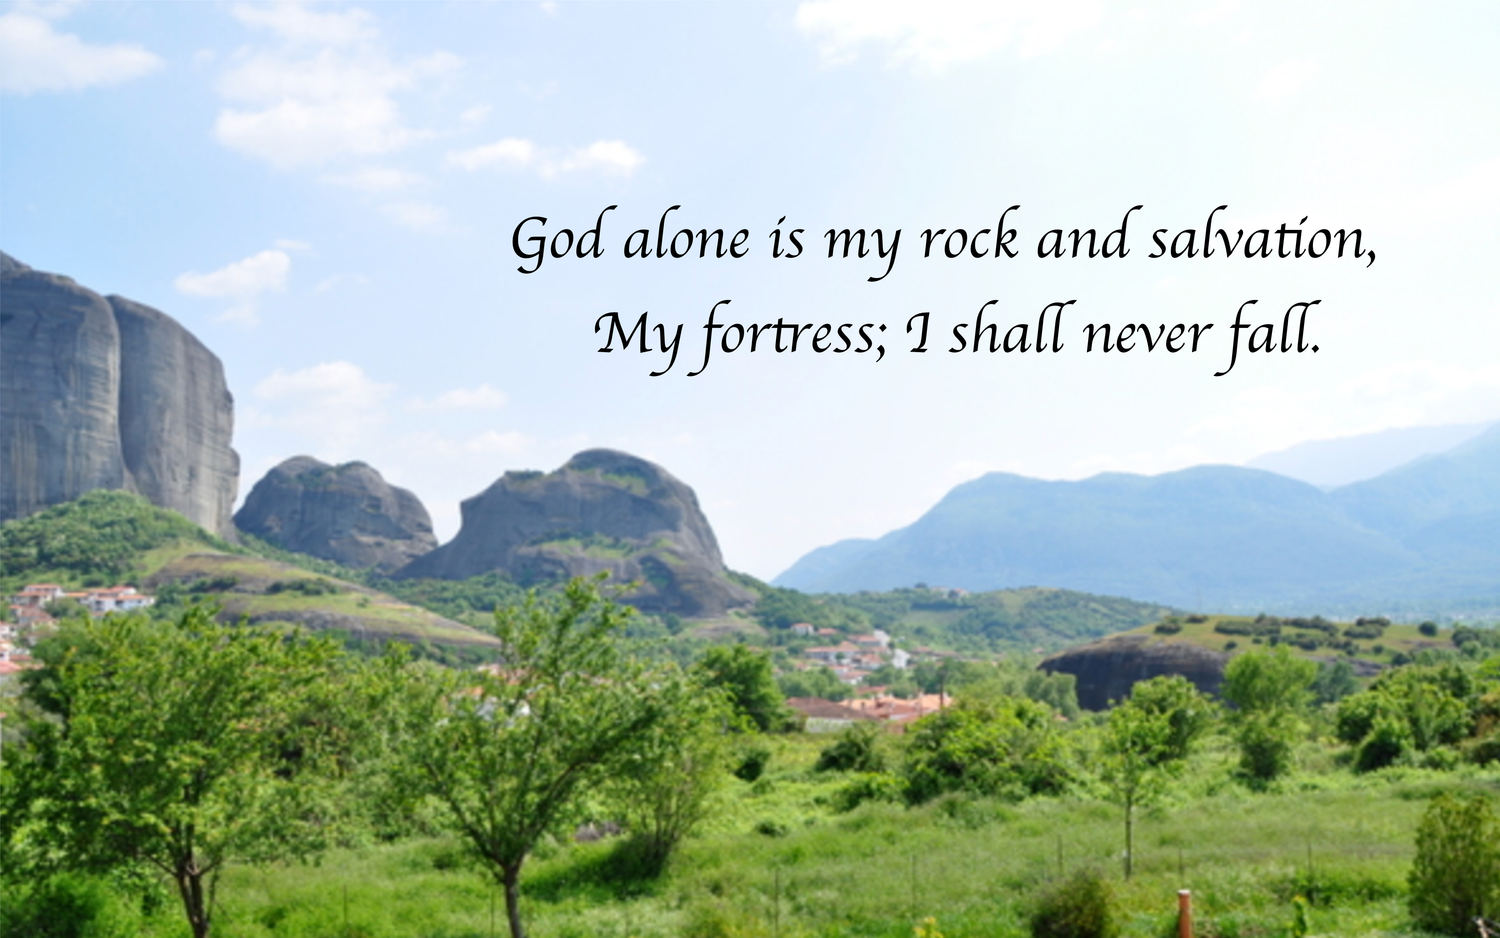 Feeling Alone? Find Solace In This Verse.